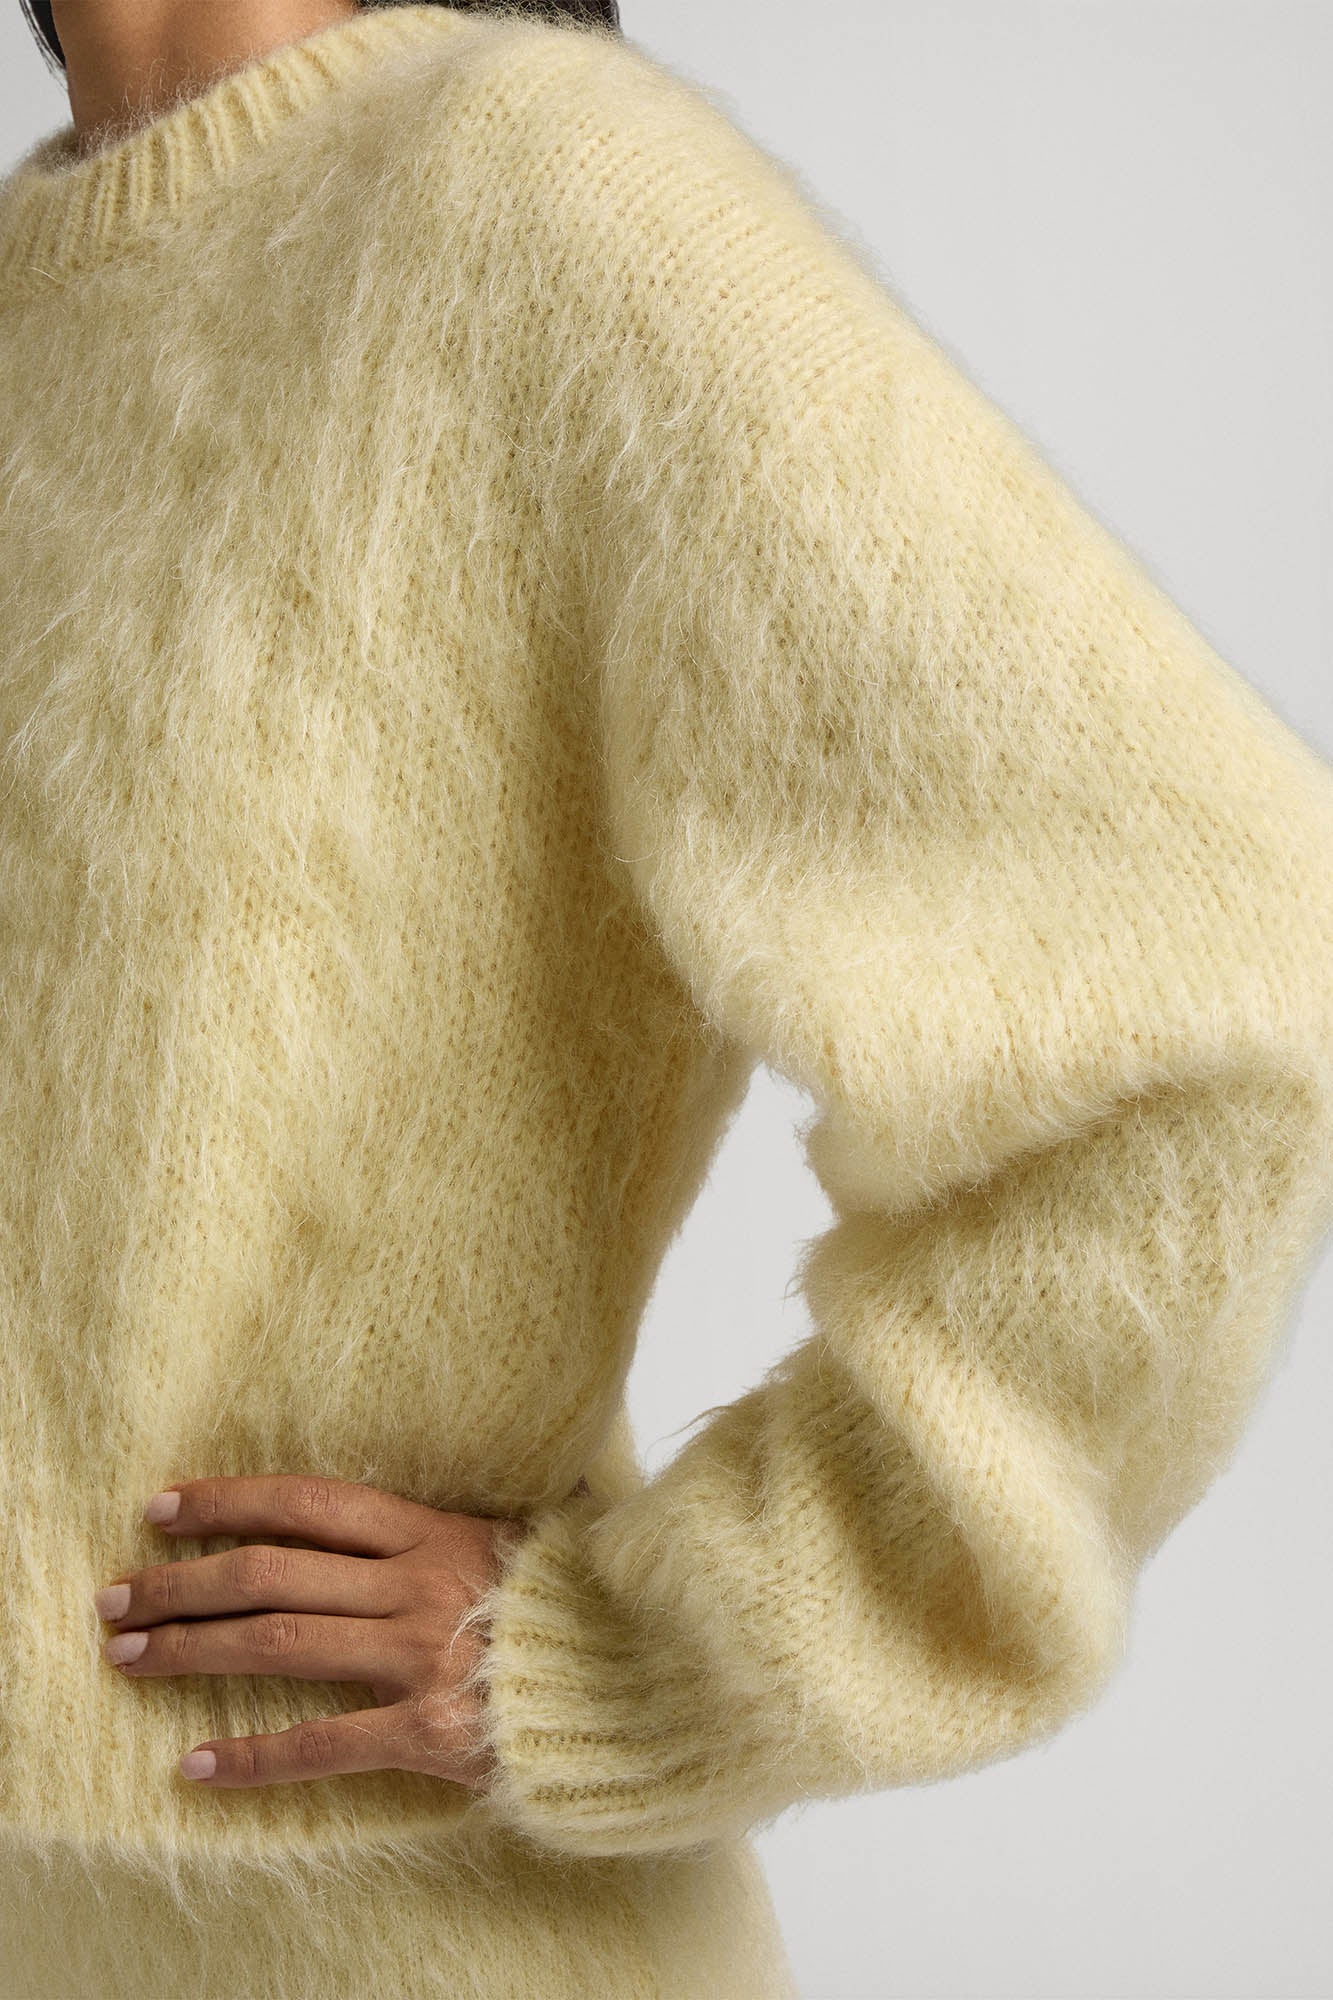 Cropped sweater with round neck in mohair